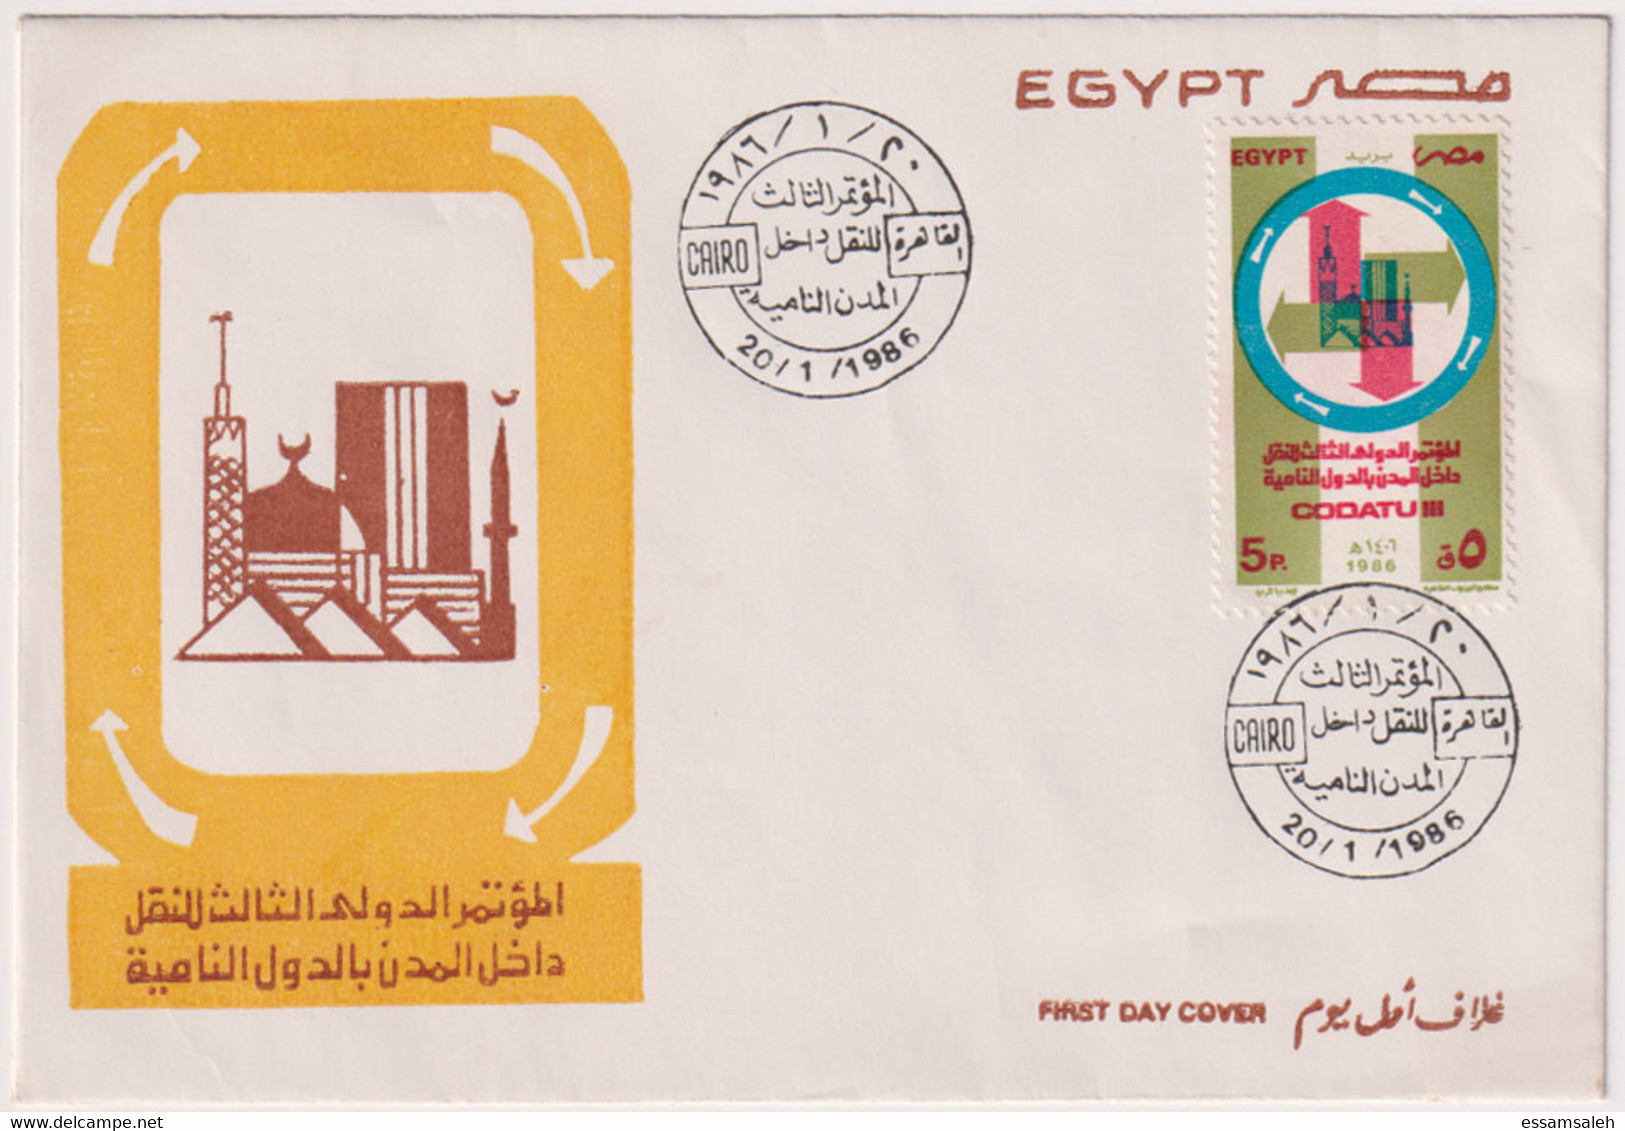 EGS30574 Egypt 1986 Illustrated FDC The 3th Conference On Transport Within Developing Cities - Covers & Documents